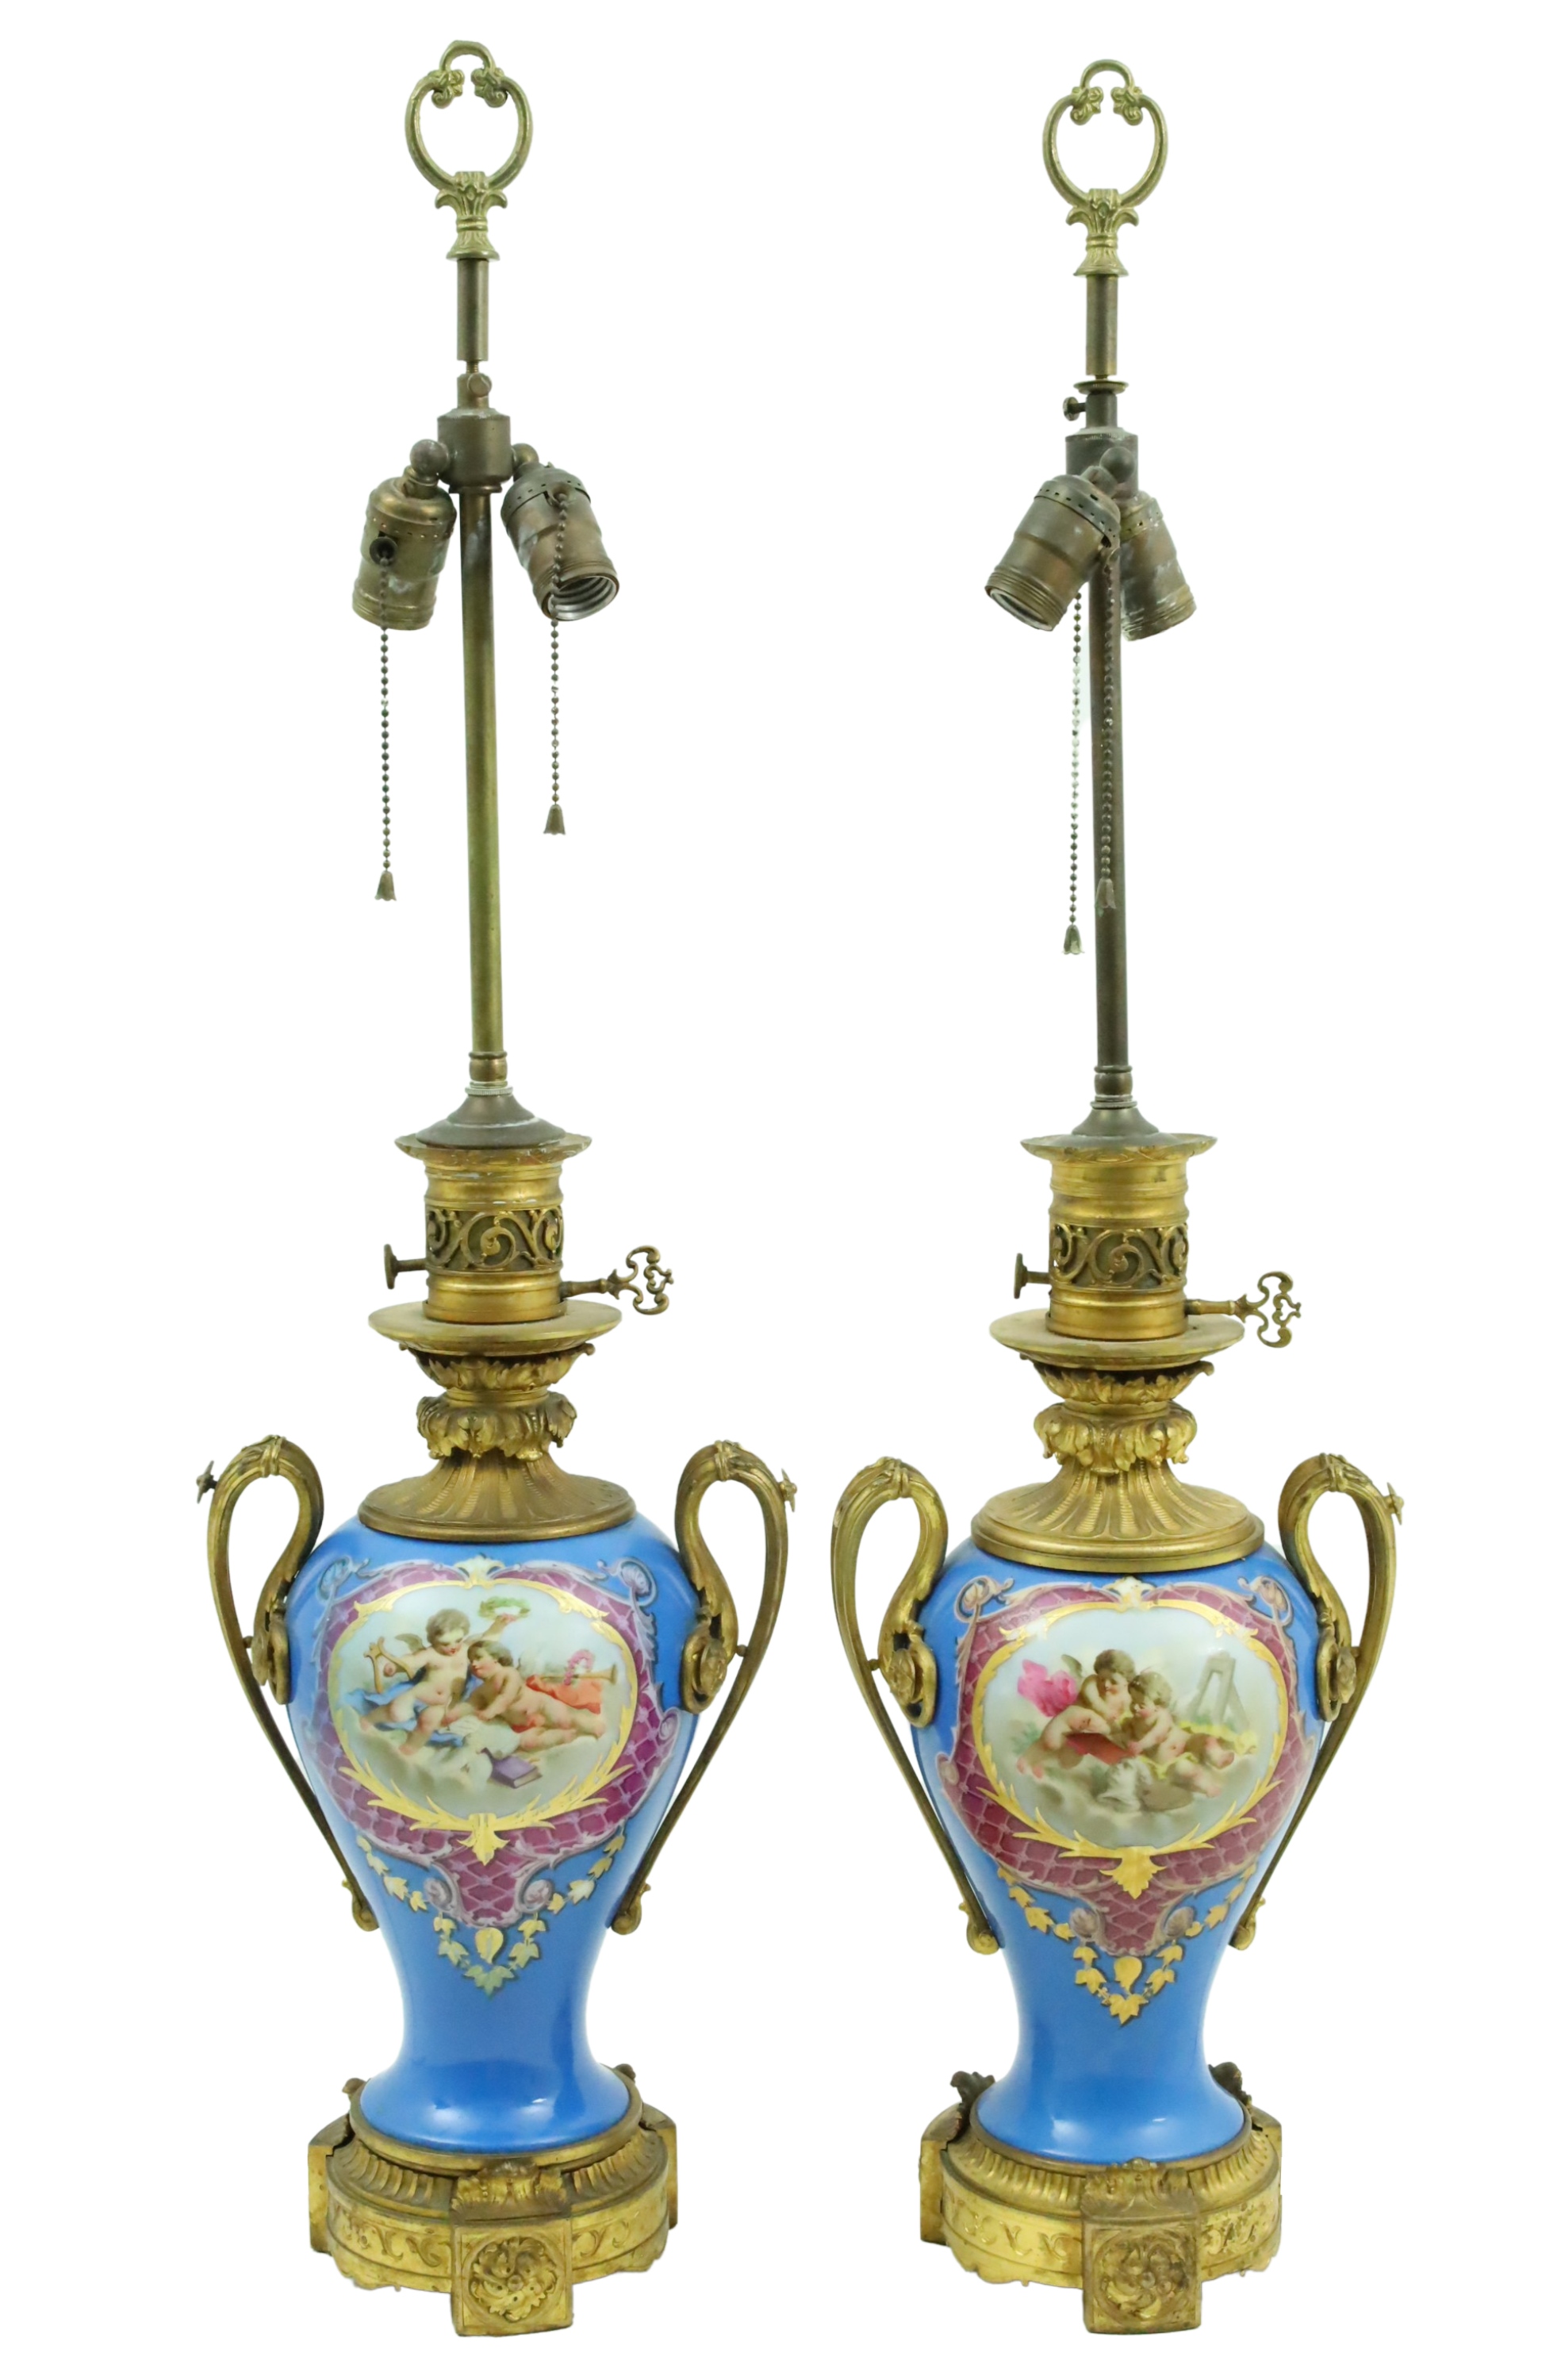 PAIR OF BRONZE MOUNTED FRENCH PORCELAIN